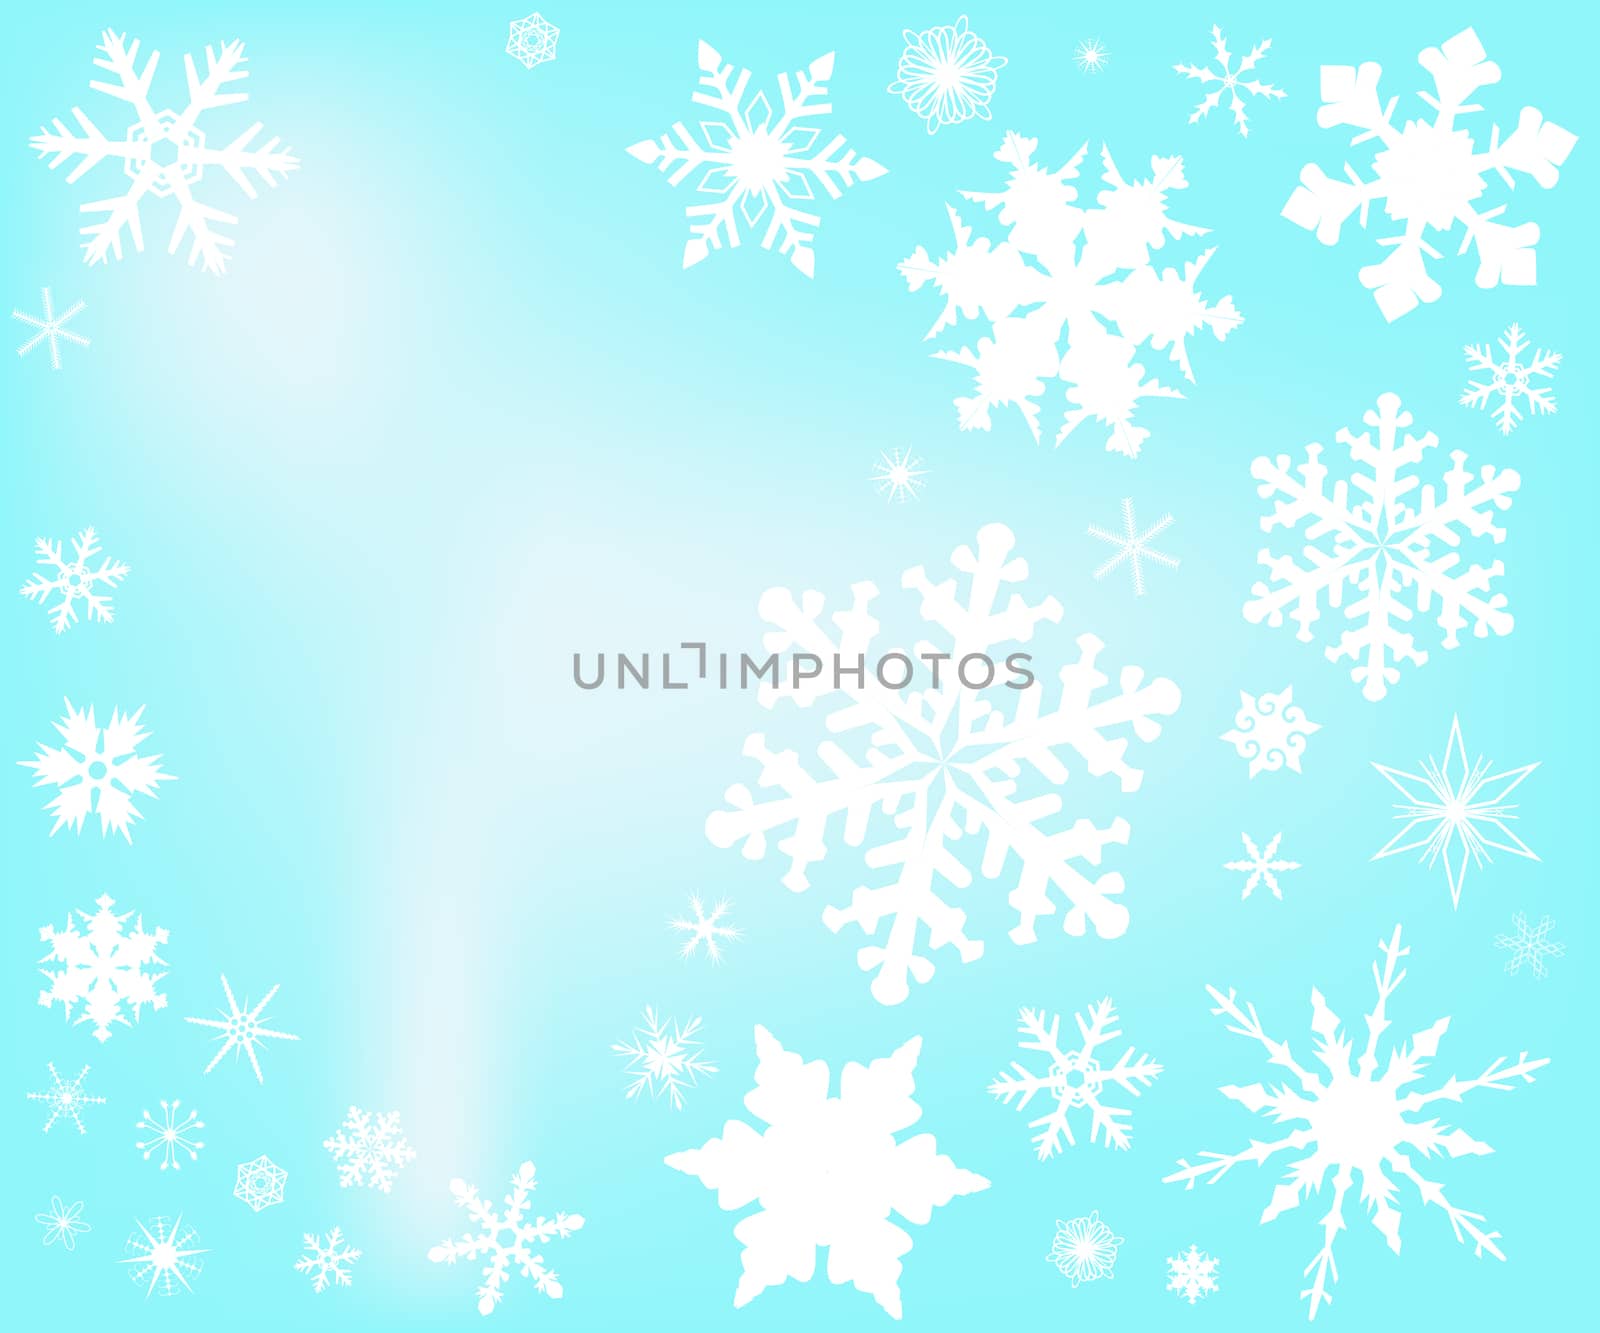 A backdrop of falling snowflakes against a light blue sky background.